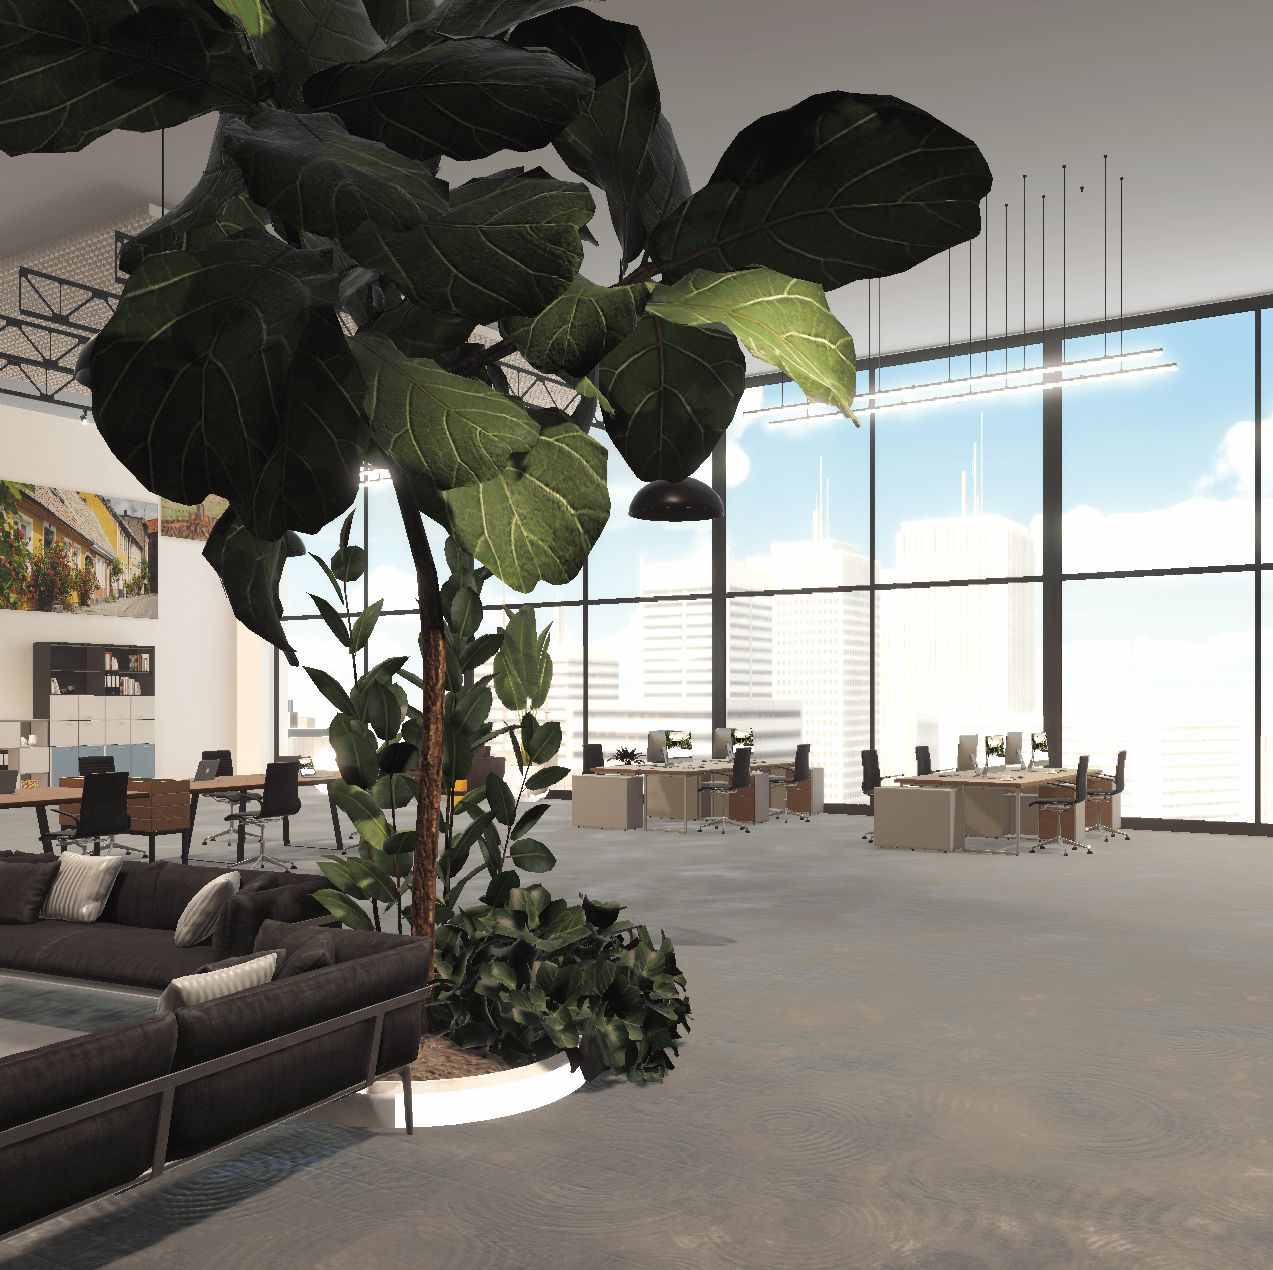 Empty online co-working space or virtual office. ReSocialize metaverse meeting platform, light and inspiring environment, floor-to-ceiling windows at the far wall, and several desks, meeting tables, and couch areas ready for online networking events and remote work.